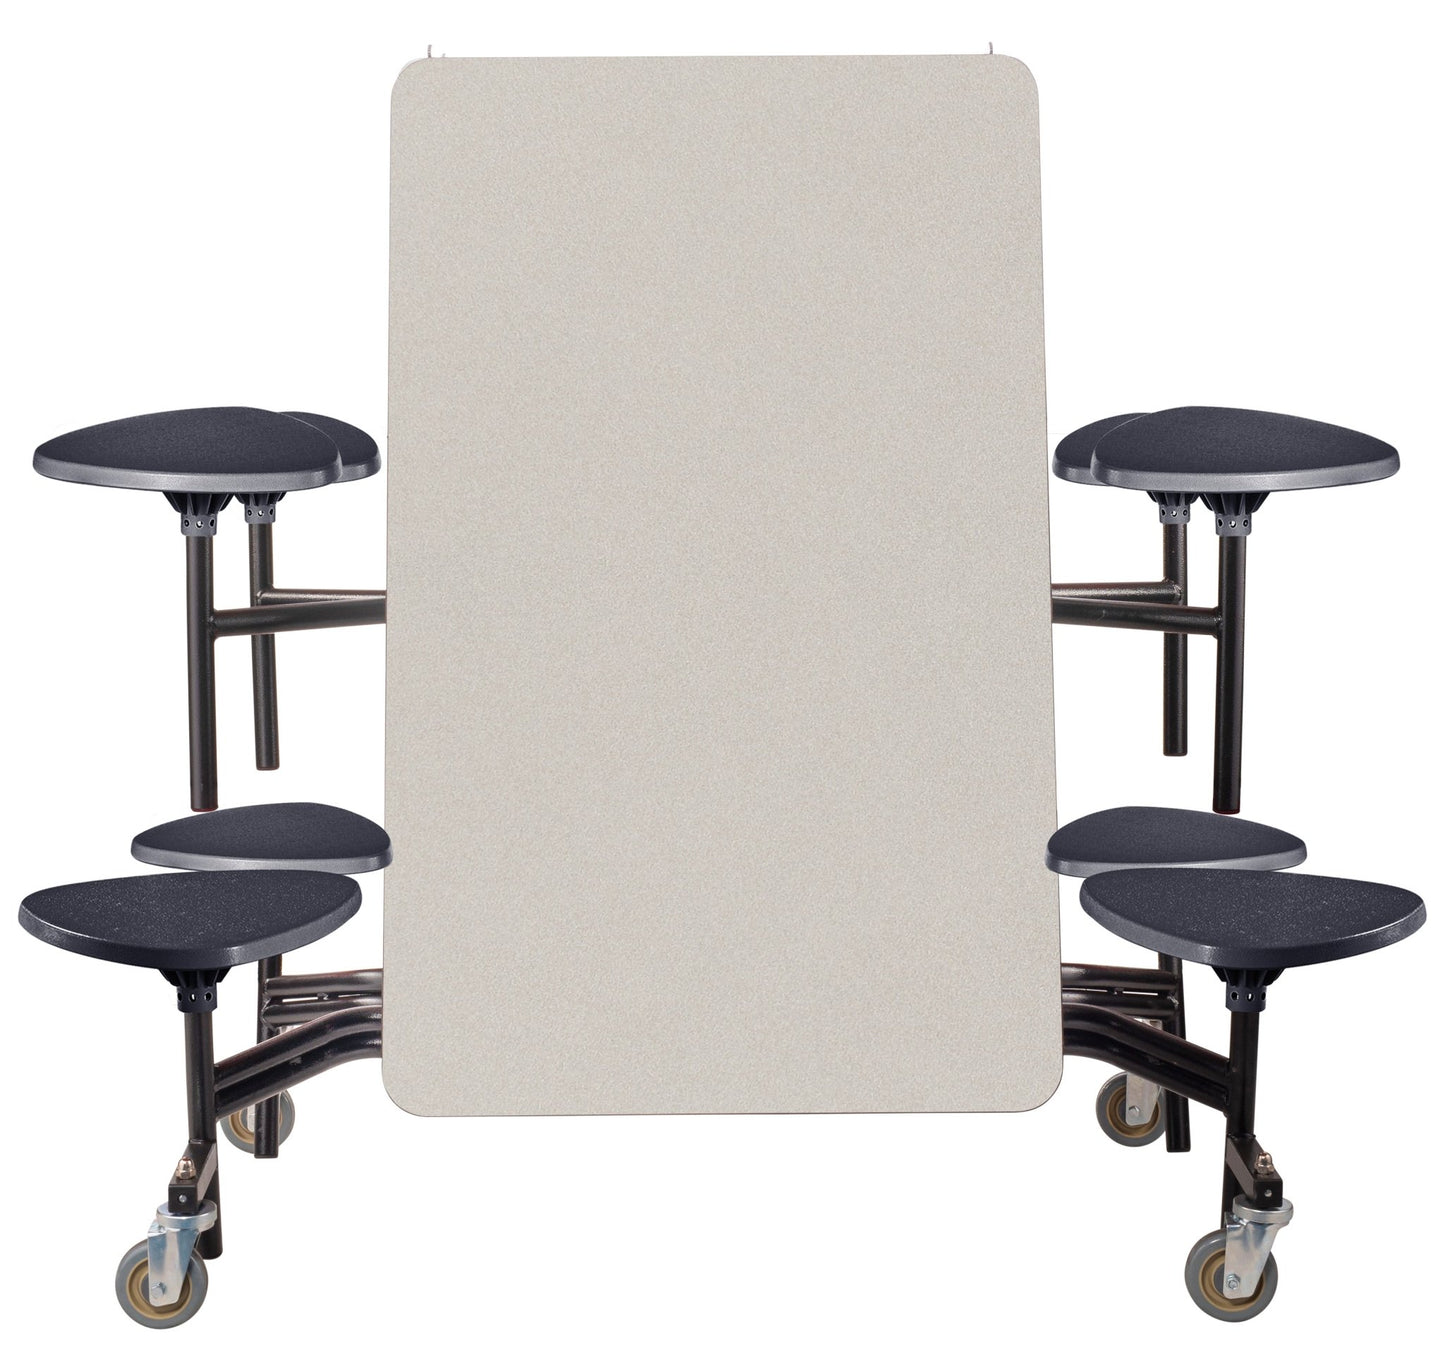 NPS Mobile Cafeteria Table - 30" W x 8' L - 8 Stools - Plywood Core - T-Molding Edge - Black Powdercoated Frame - SchoolOutlet